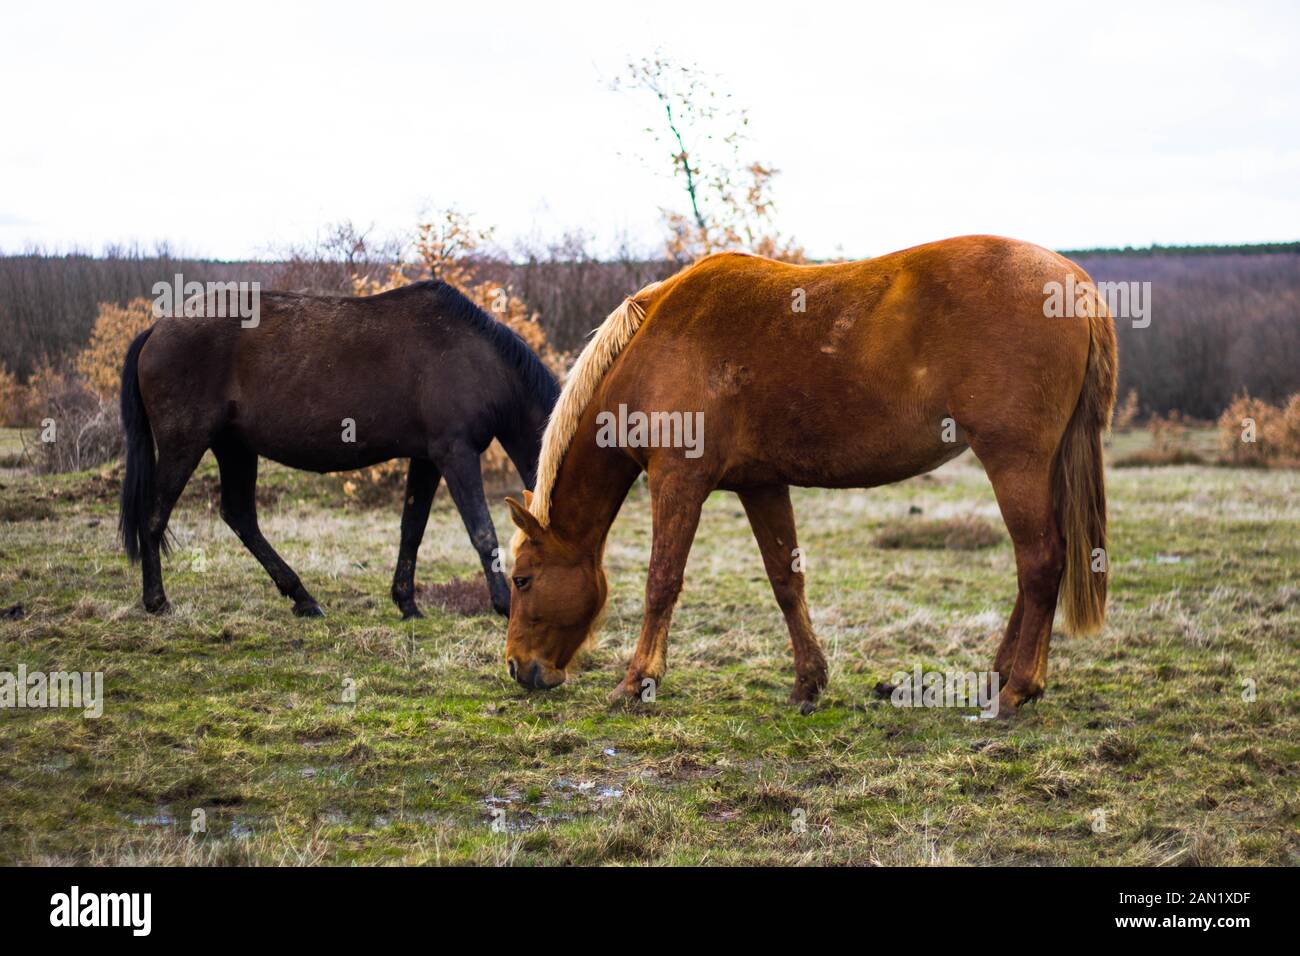 two horses eating grass, brown and black Stock Photo